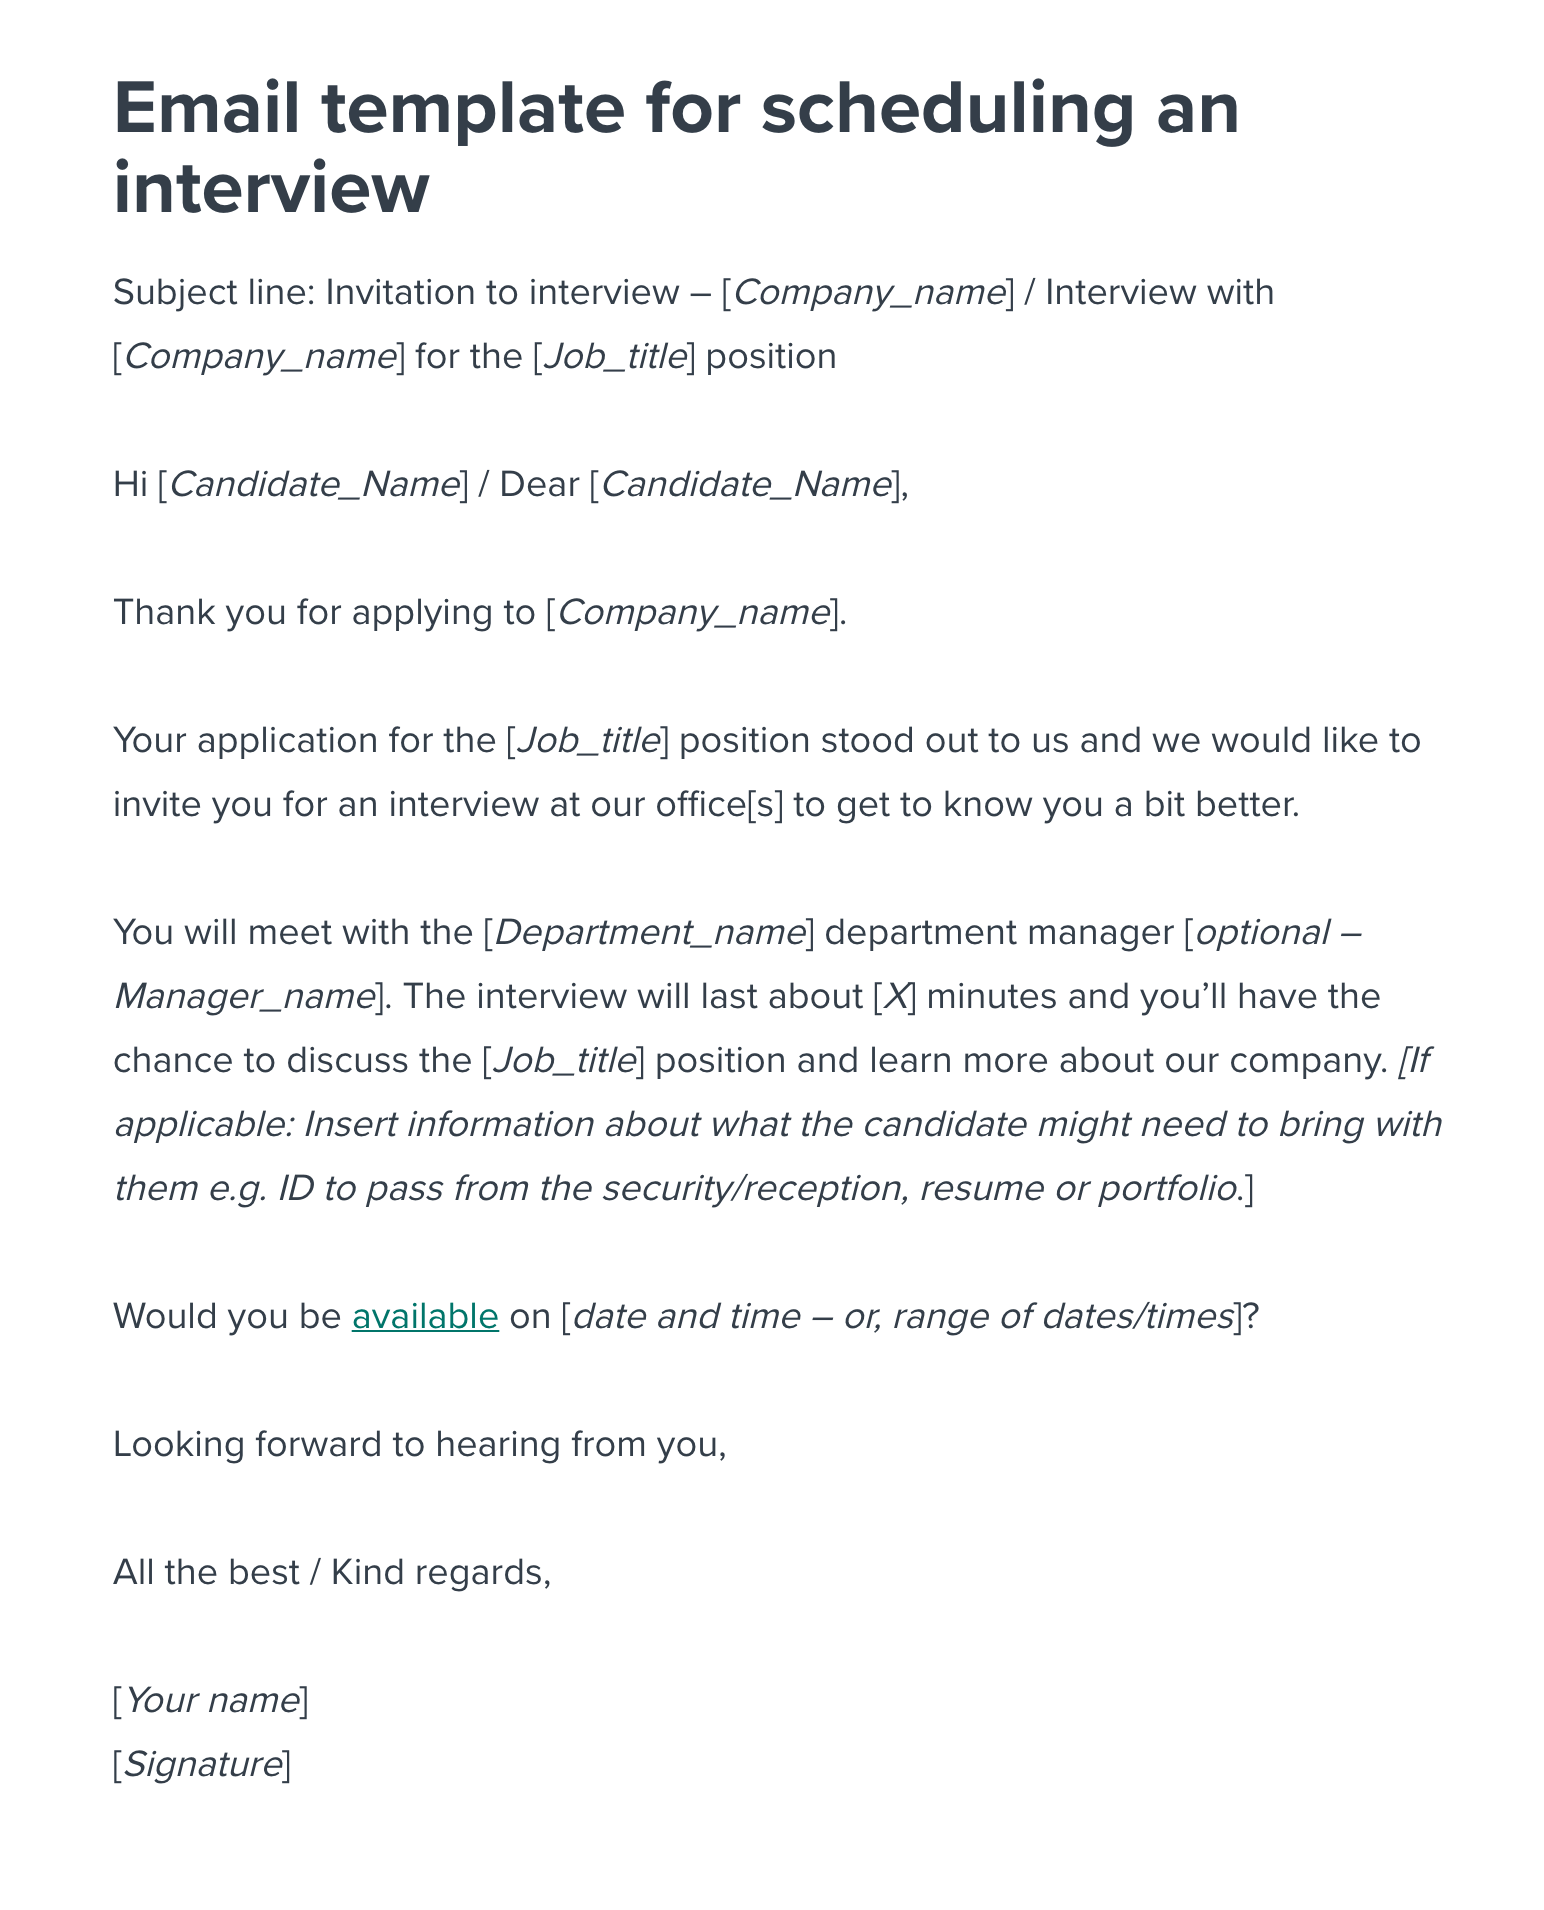 how to write an interview request email